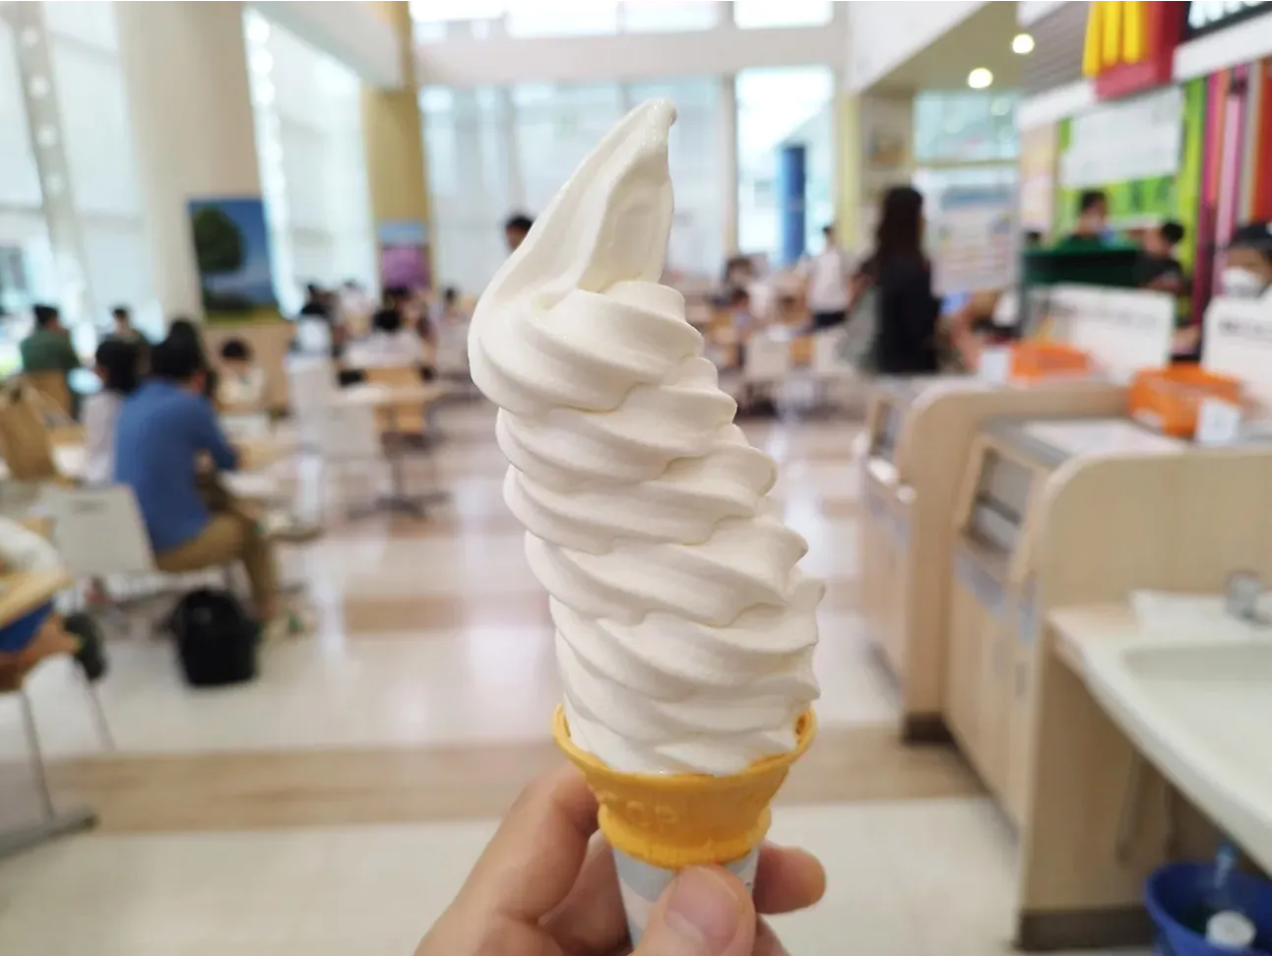 McDonald’s Japan’s Soft Twist Tower: An ice cream only sold at select branches